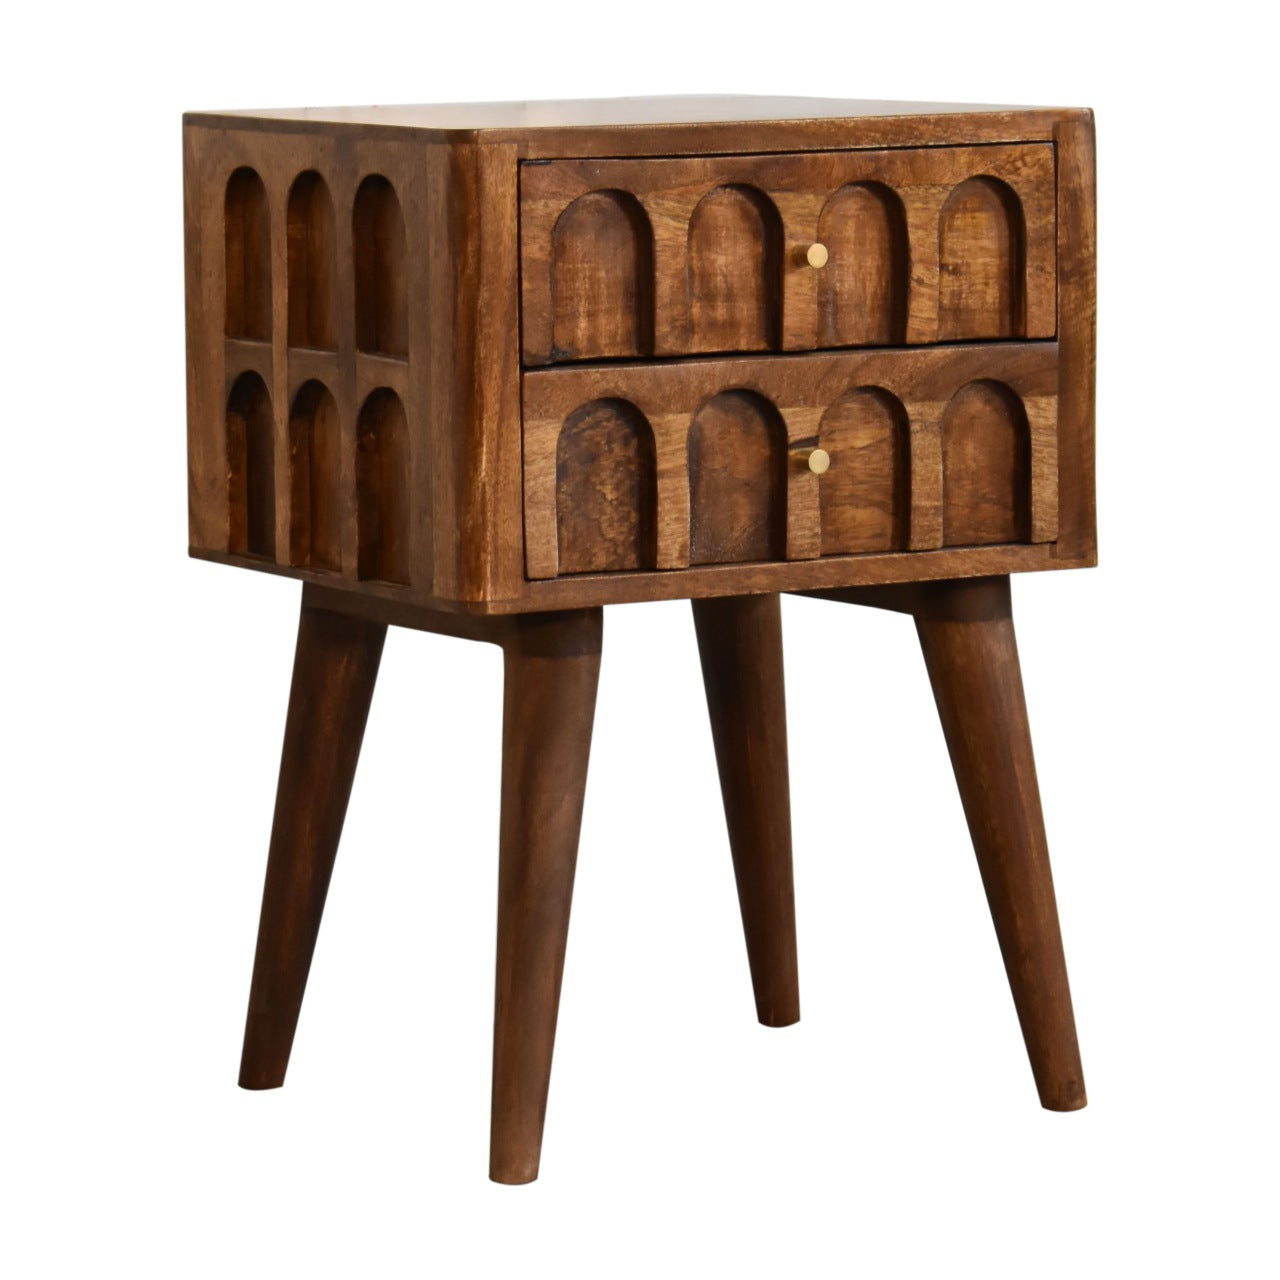 Chestnut Carved Arch Bedside Table 2 Drawer Chest made with Mango Wood - CasaFenix